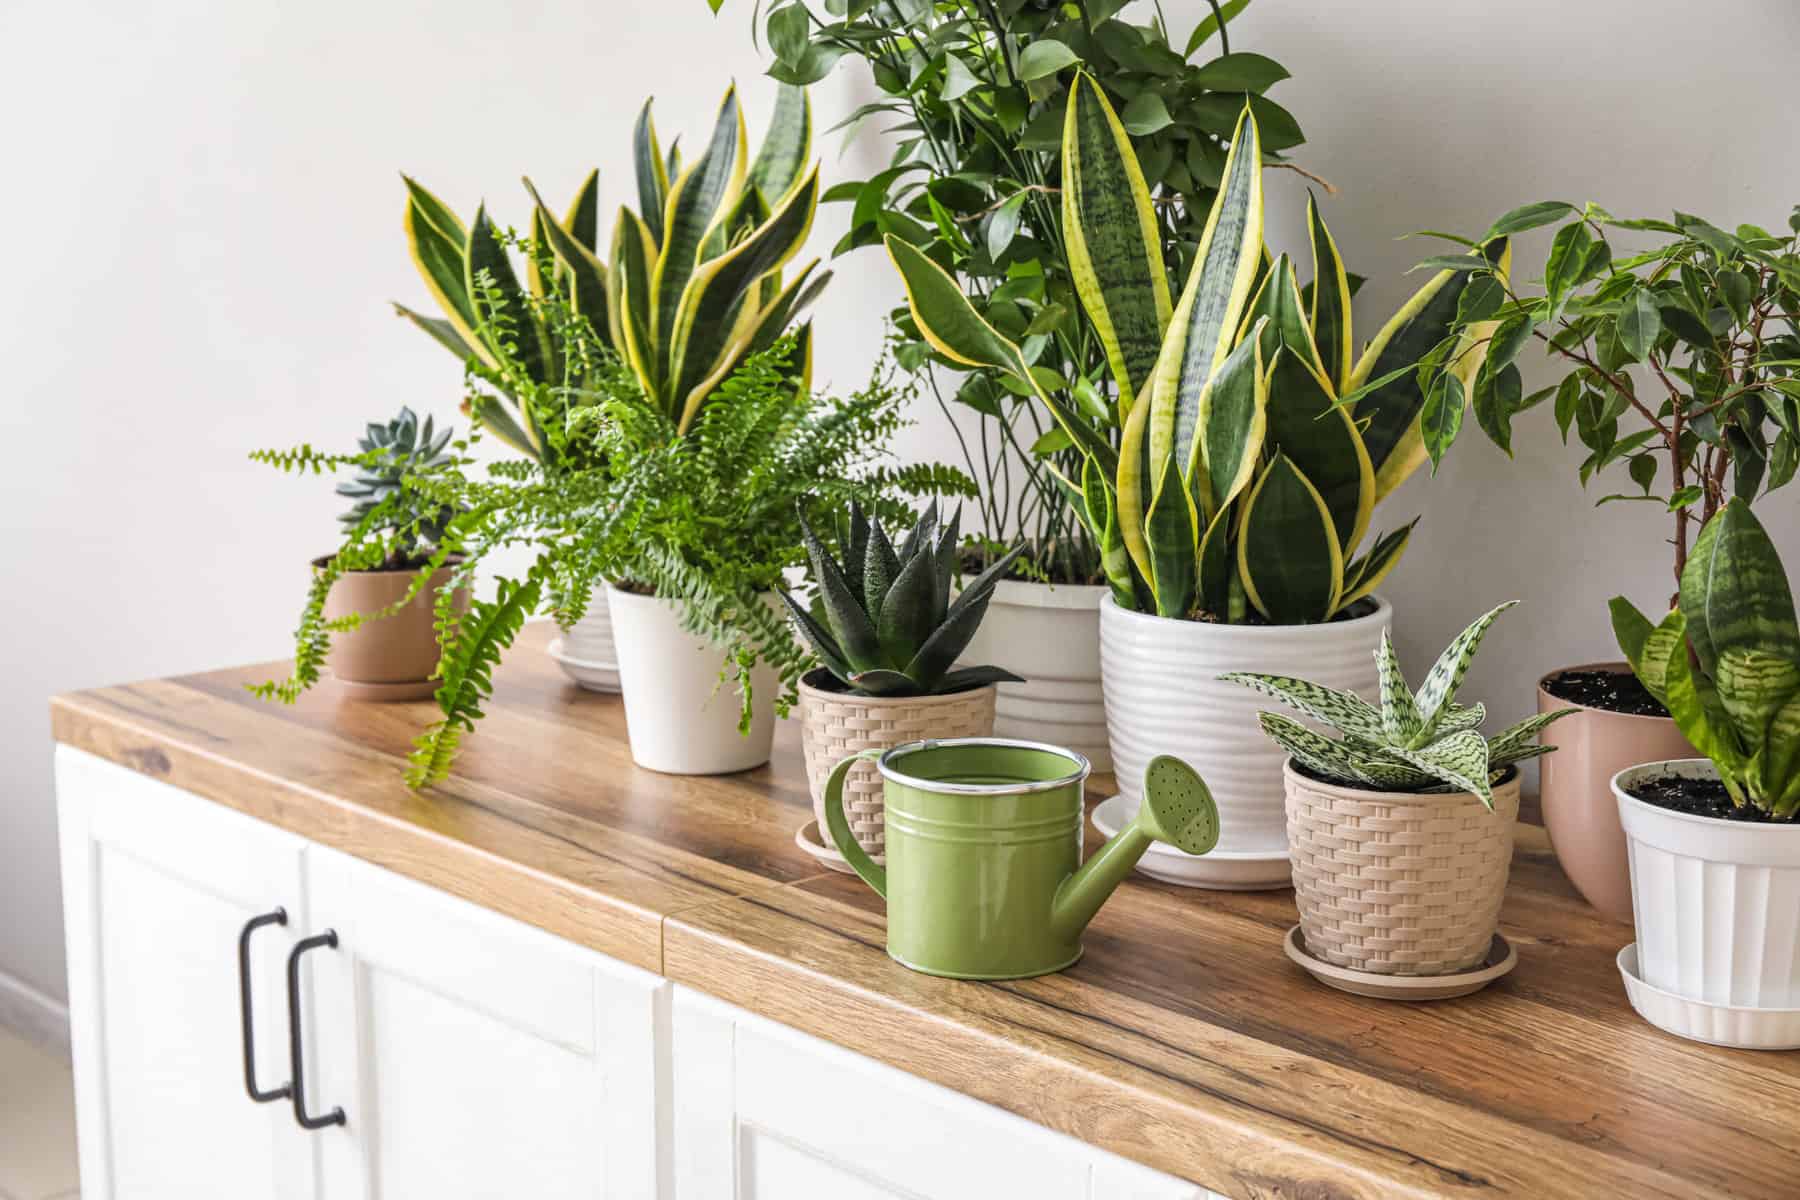 Featured image for “Winter Houseplant Care: Transitioning Houseplants Indoors and Caring for them During the Cold Months”